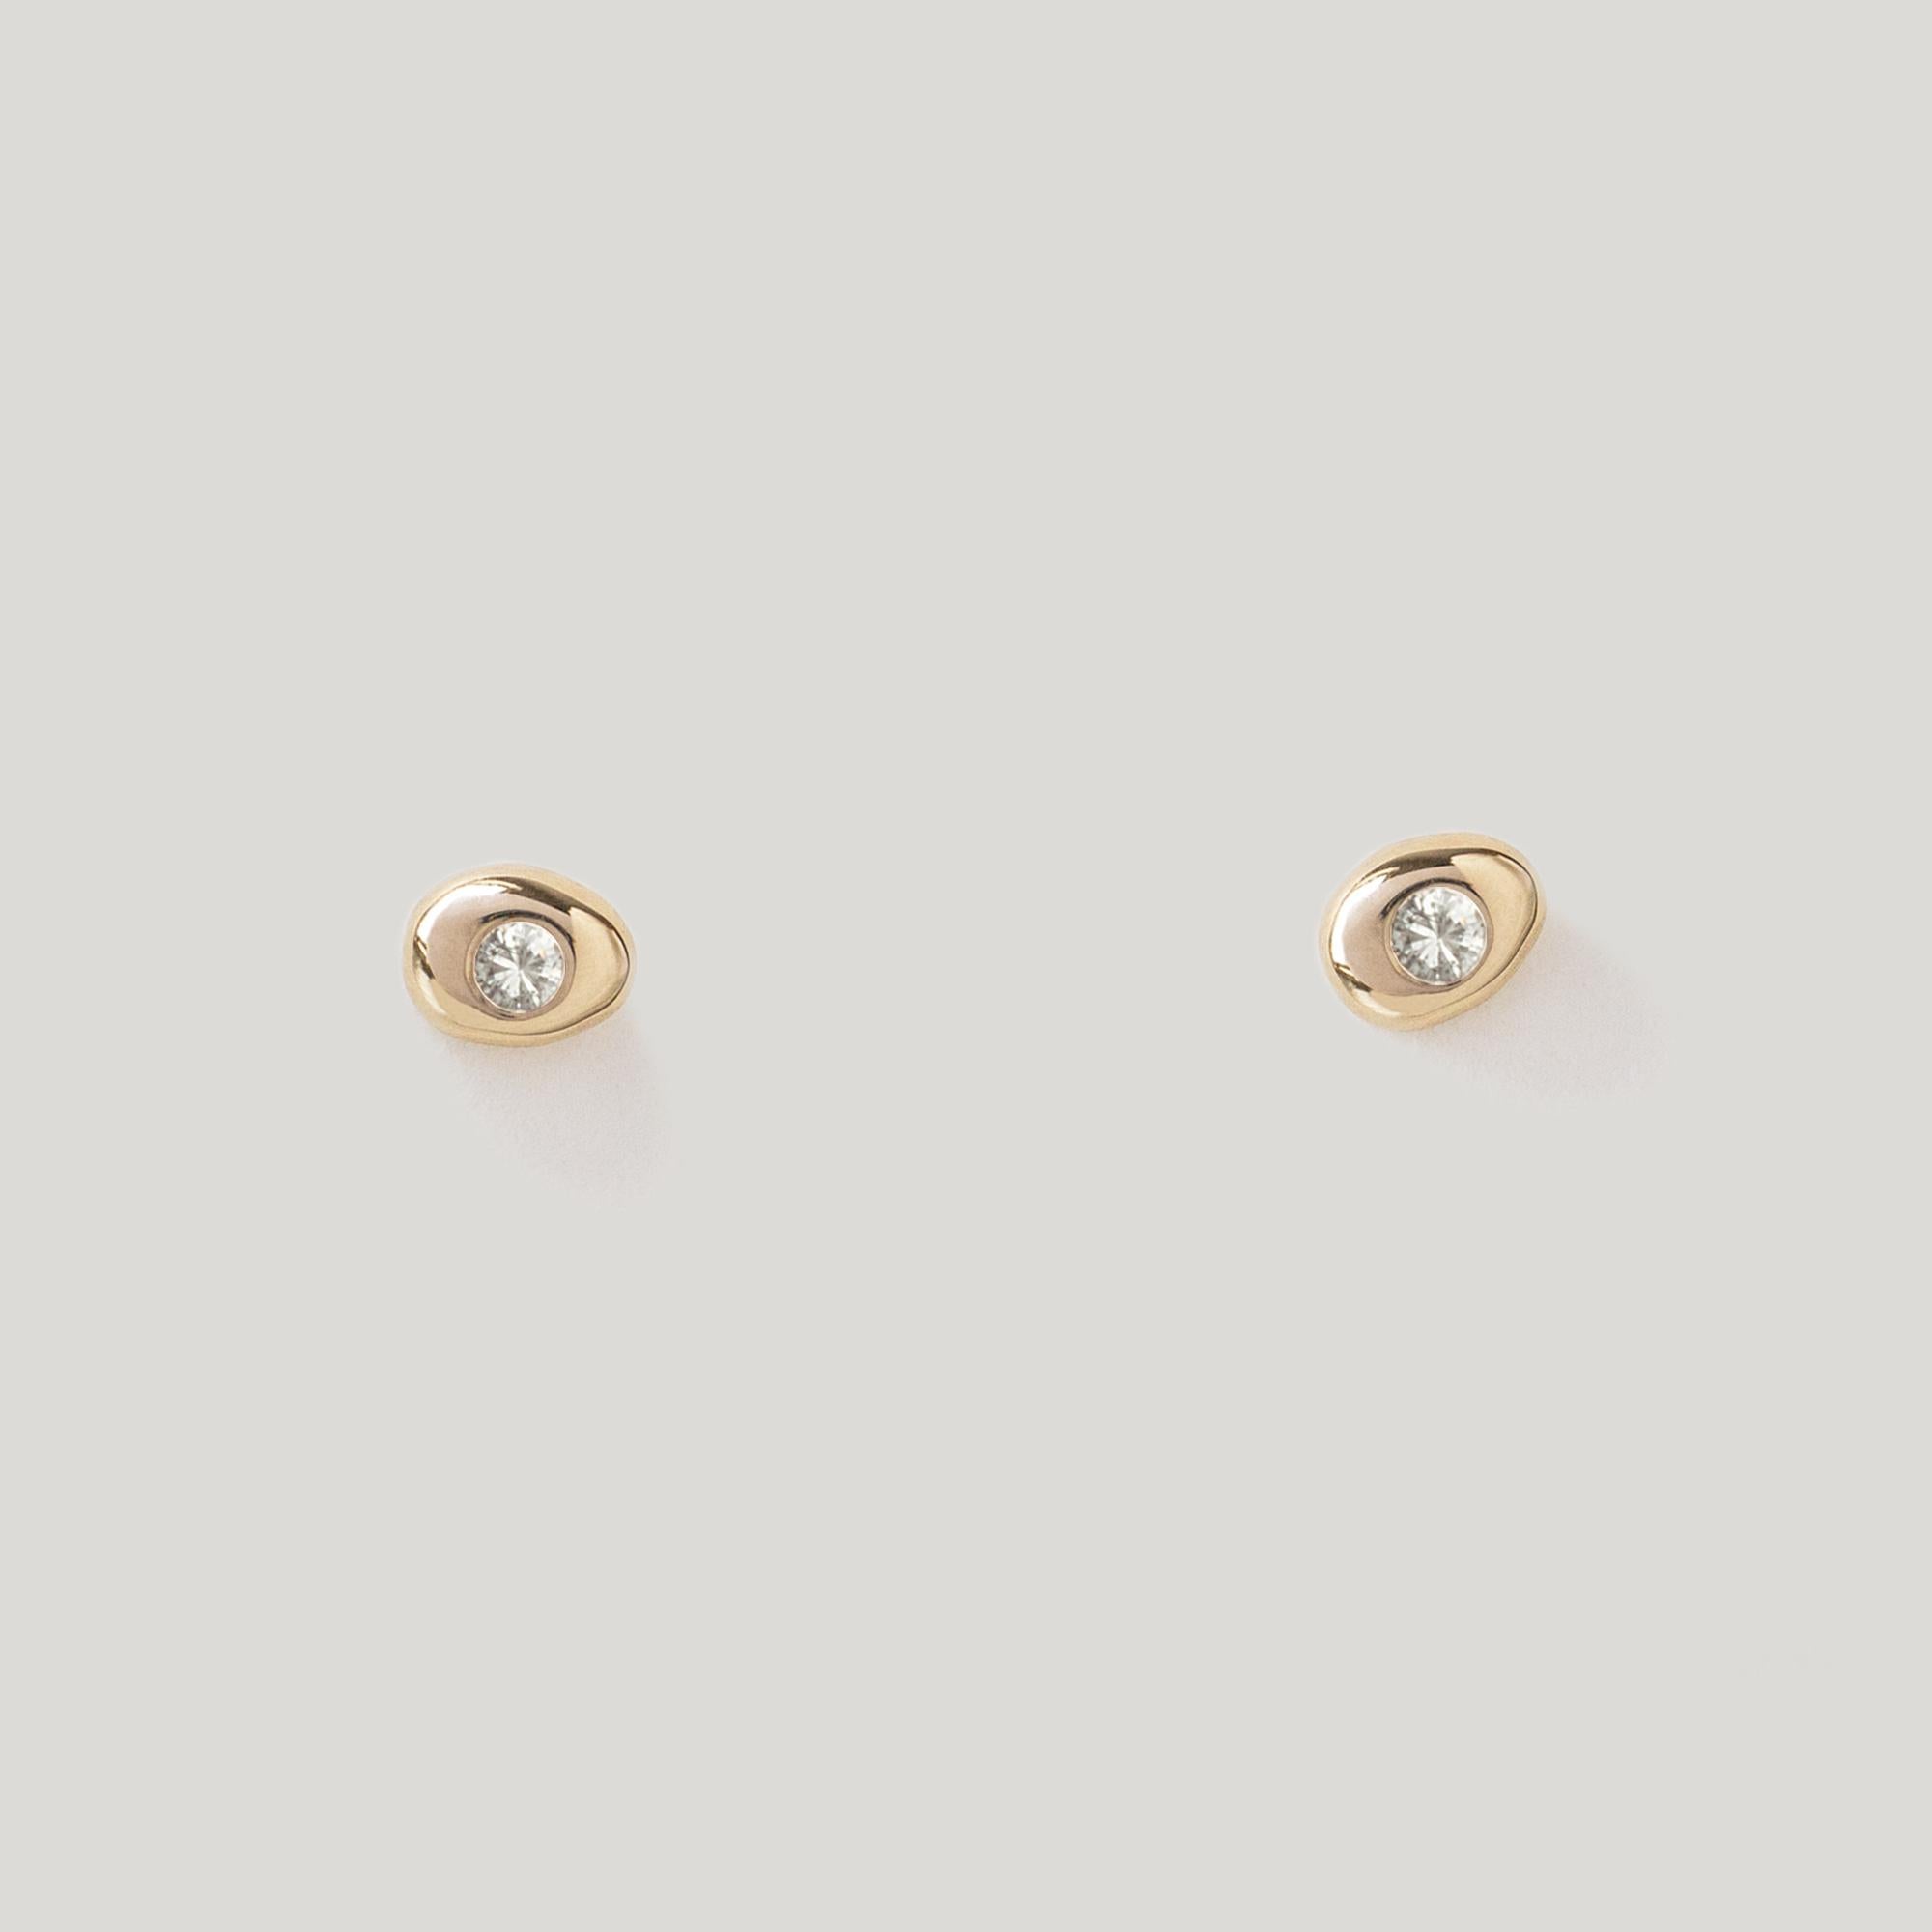 Tender little pebble studs, pierced with a White Diamond eye.

MATERIAL
◘  4mm wide by 5.5mm tall
◘  2mm brilliant-cut White Diamond (SI)
◘  Diamond is reclaimed and fair trade
◘  Post and back closure
◘  Sold as a pair
◘ Available in 14k Yellow,